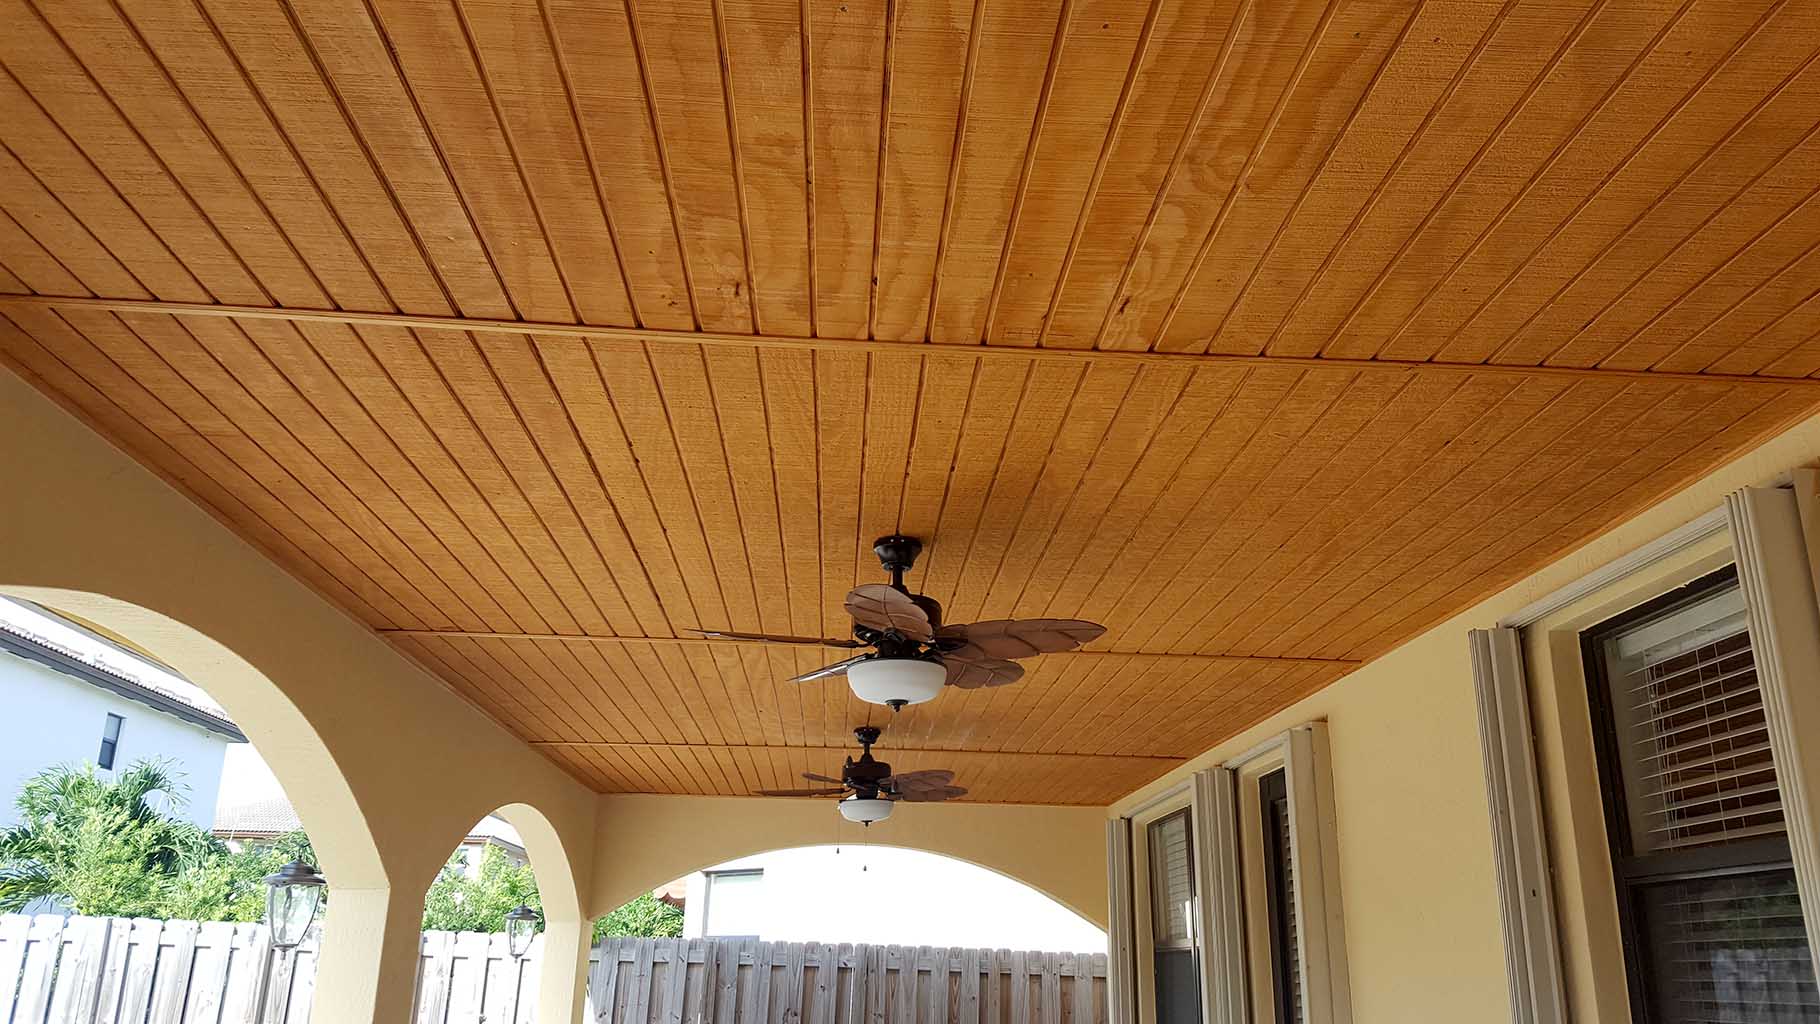 Covered patio ceiling finished with wood trim & ceiling fans installed